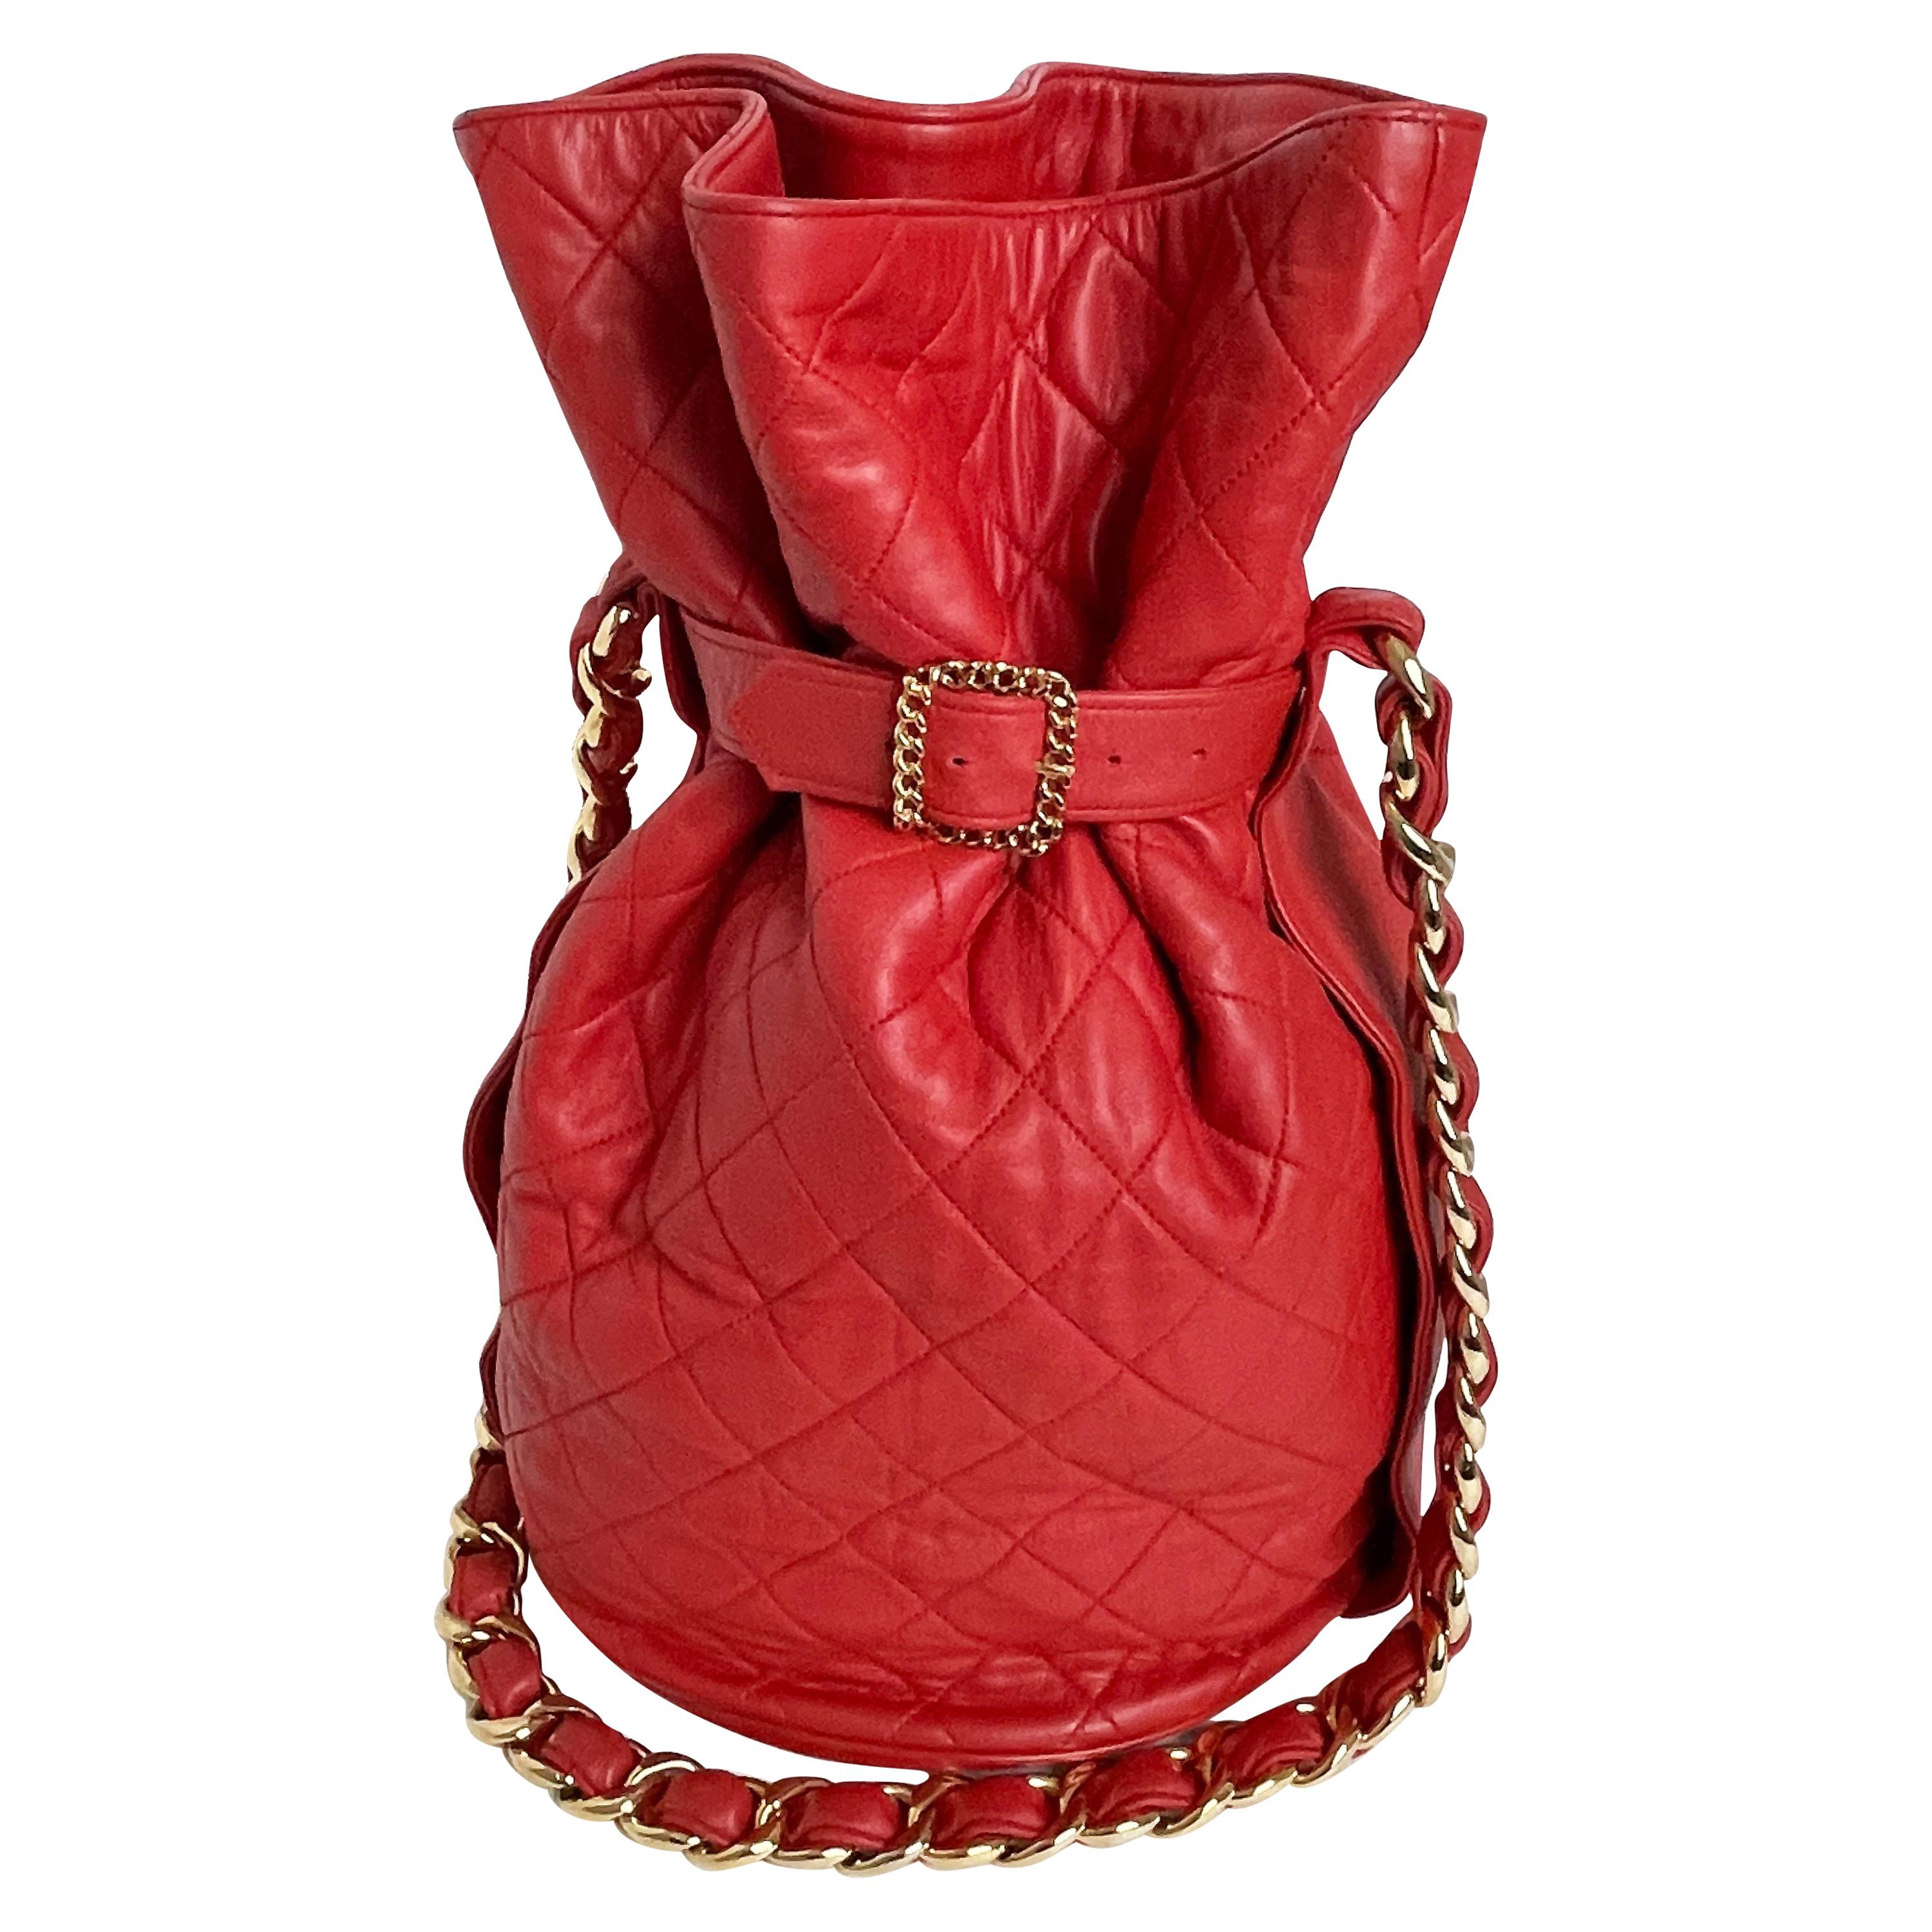 Chanel Bowling Bag Luxury Ligne Leather As Seen On Ivanka Trump Red  Lambskin Bag